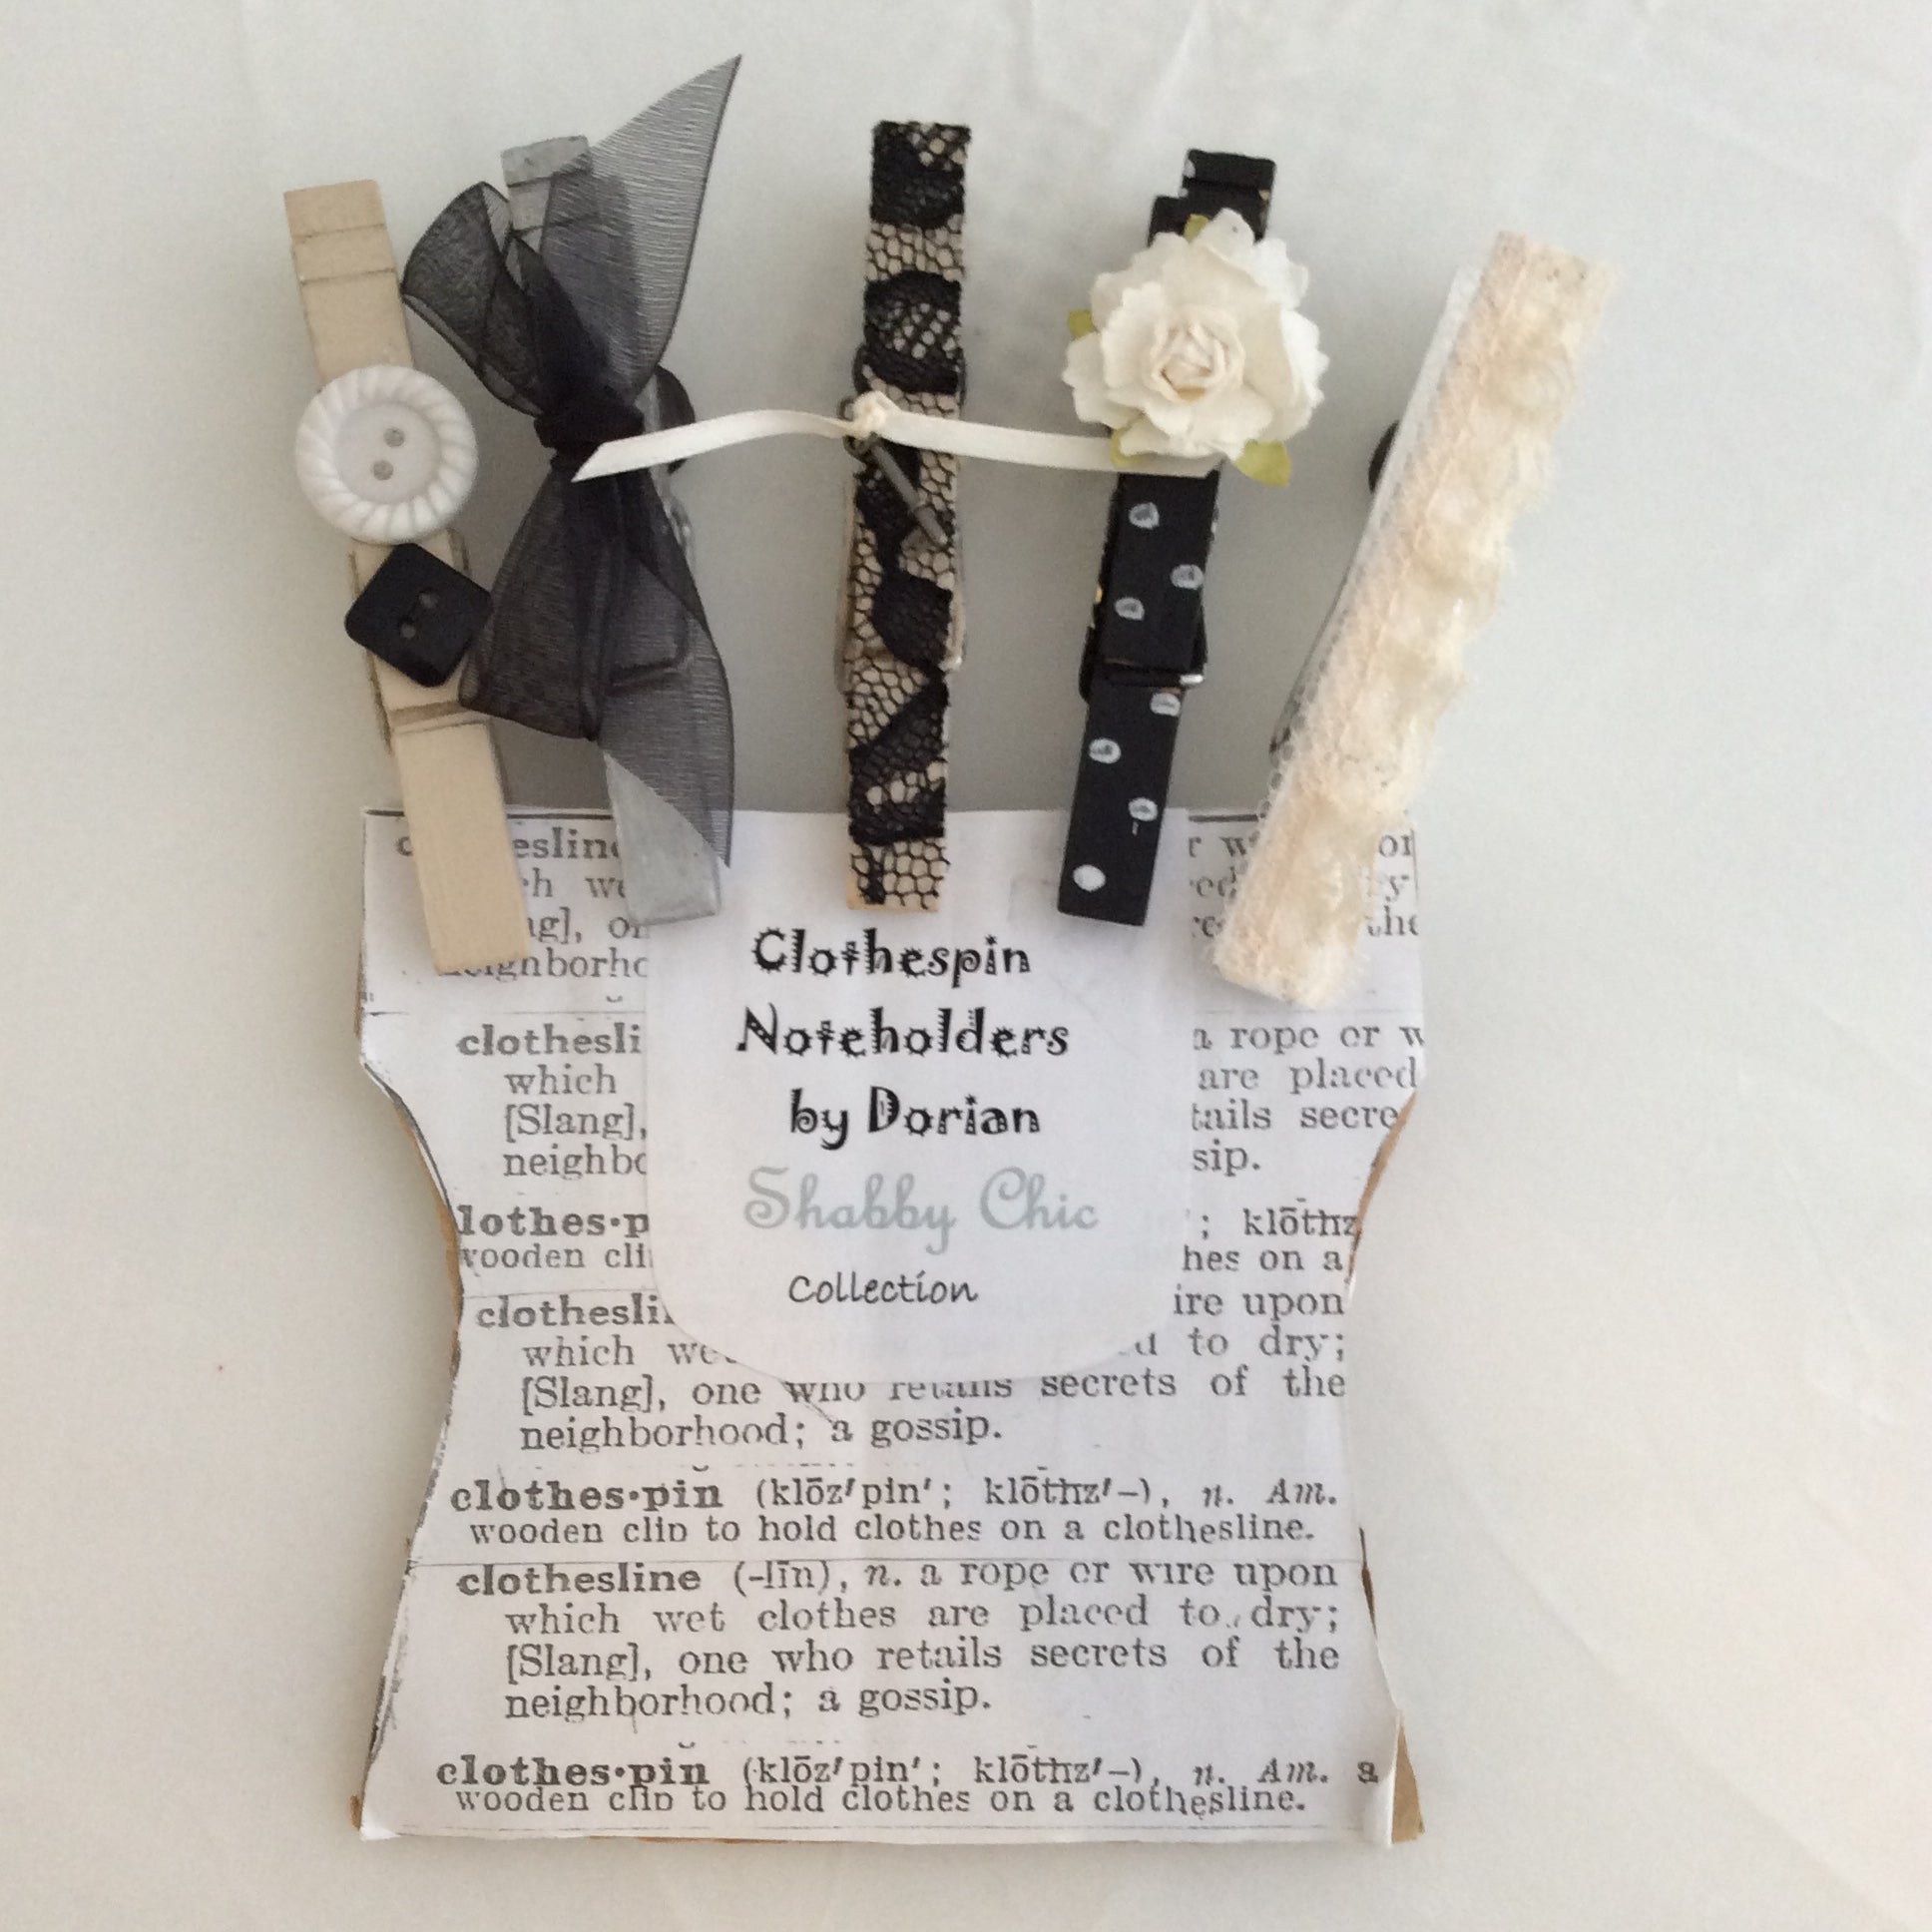 Shabby Chic Clothespin Noteholders - Five and Divine